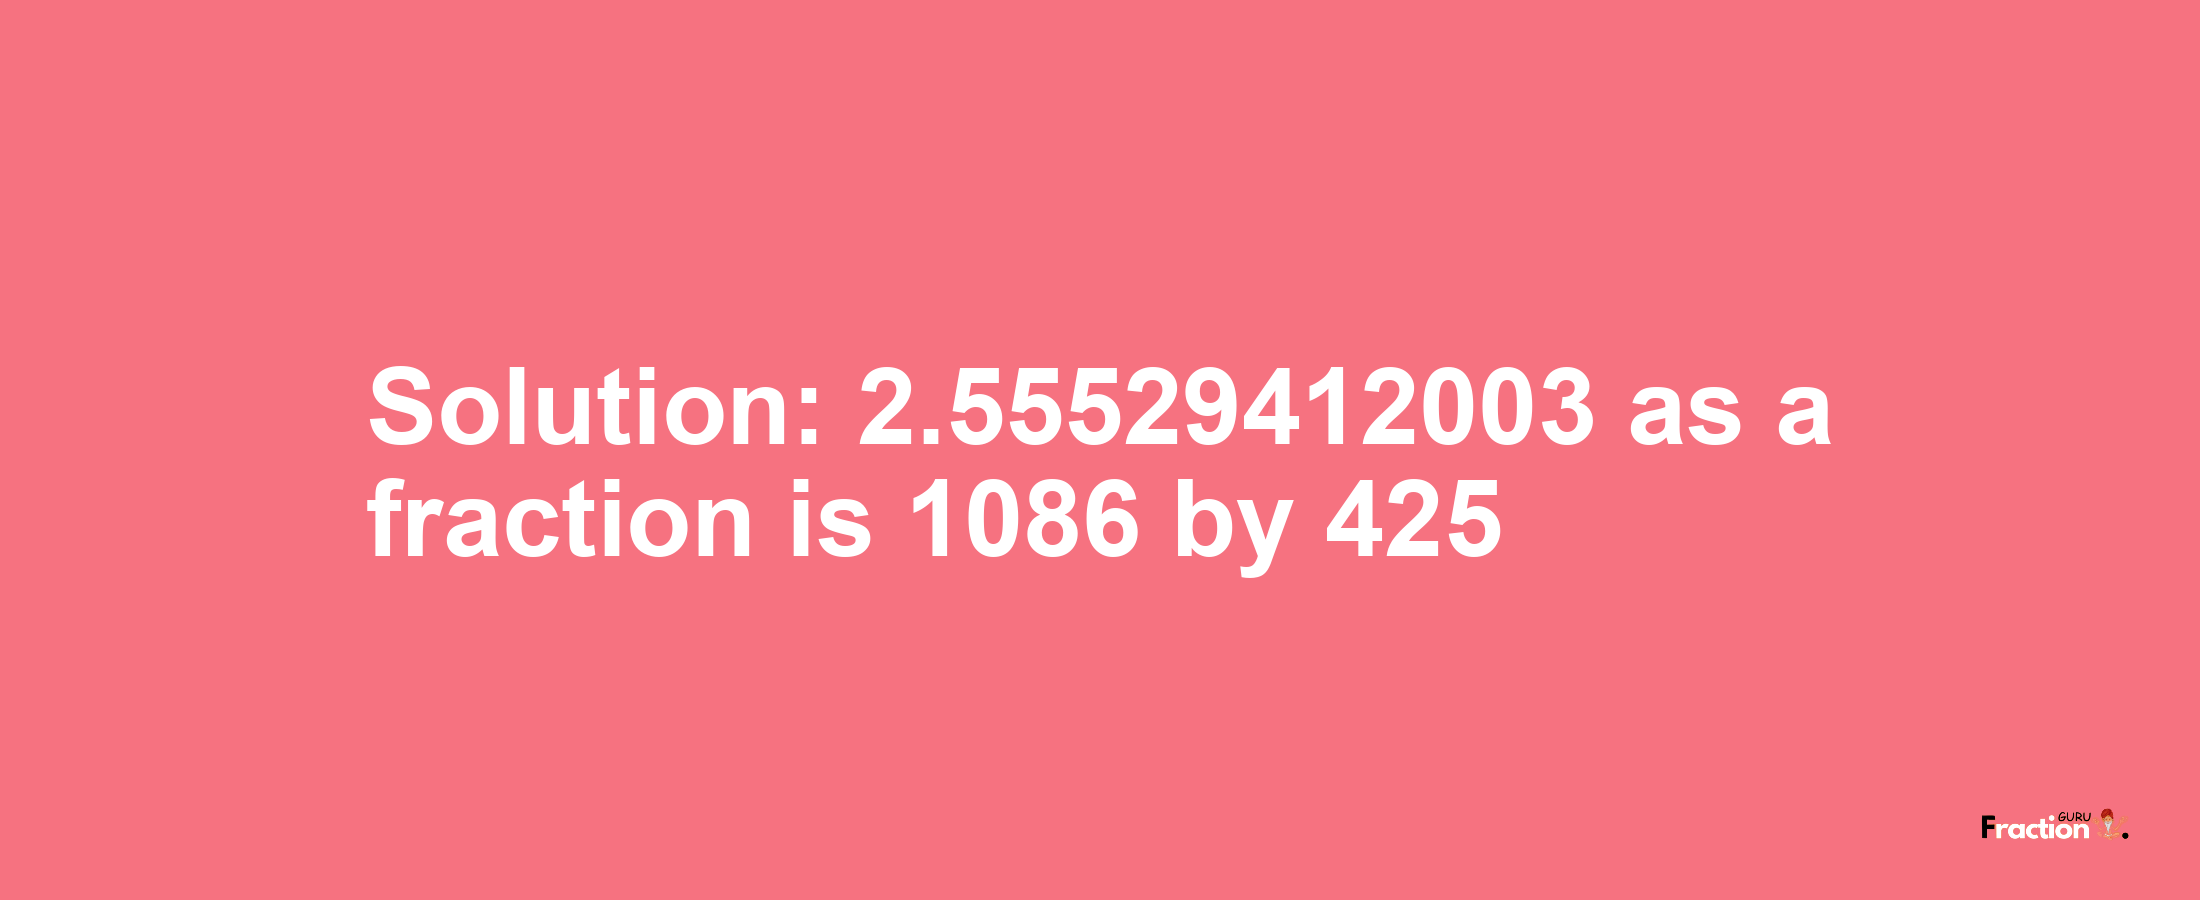 Solution:2.55529412003 as a fraction is 1086/425